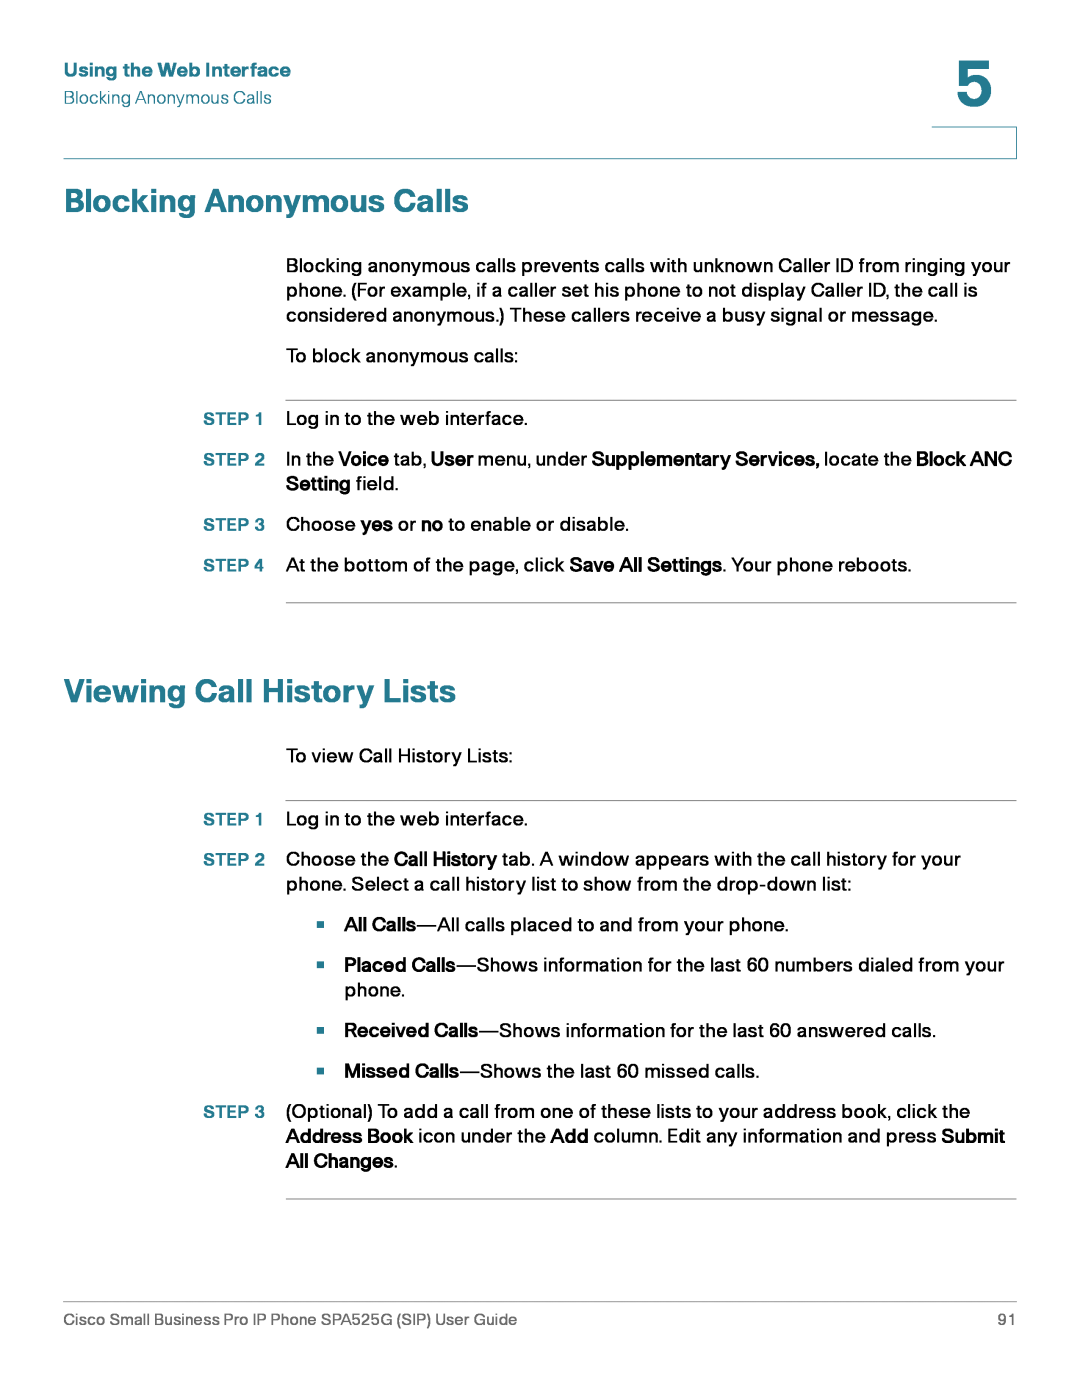 Cisco Systems SPA525G manual Blocking Anonymous Calls, Viewing Call History Lists, Using the Web Interface 